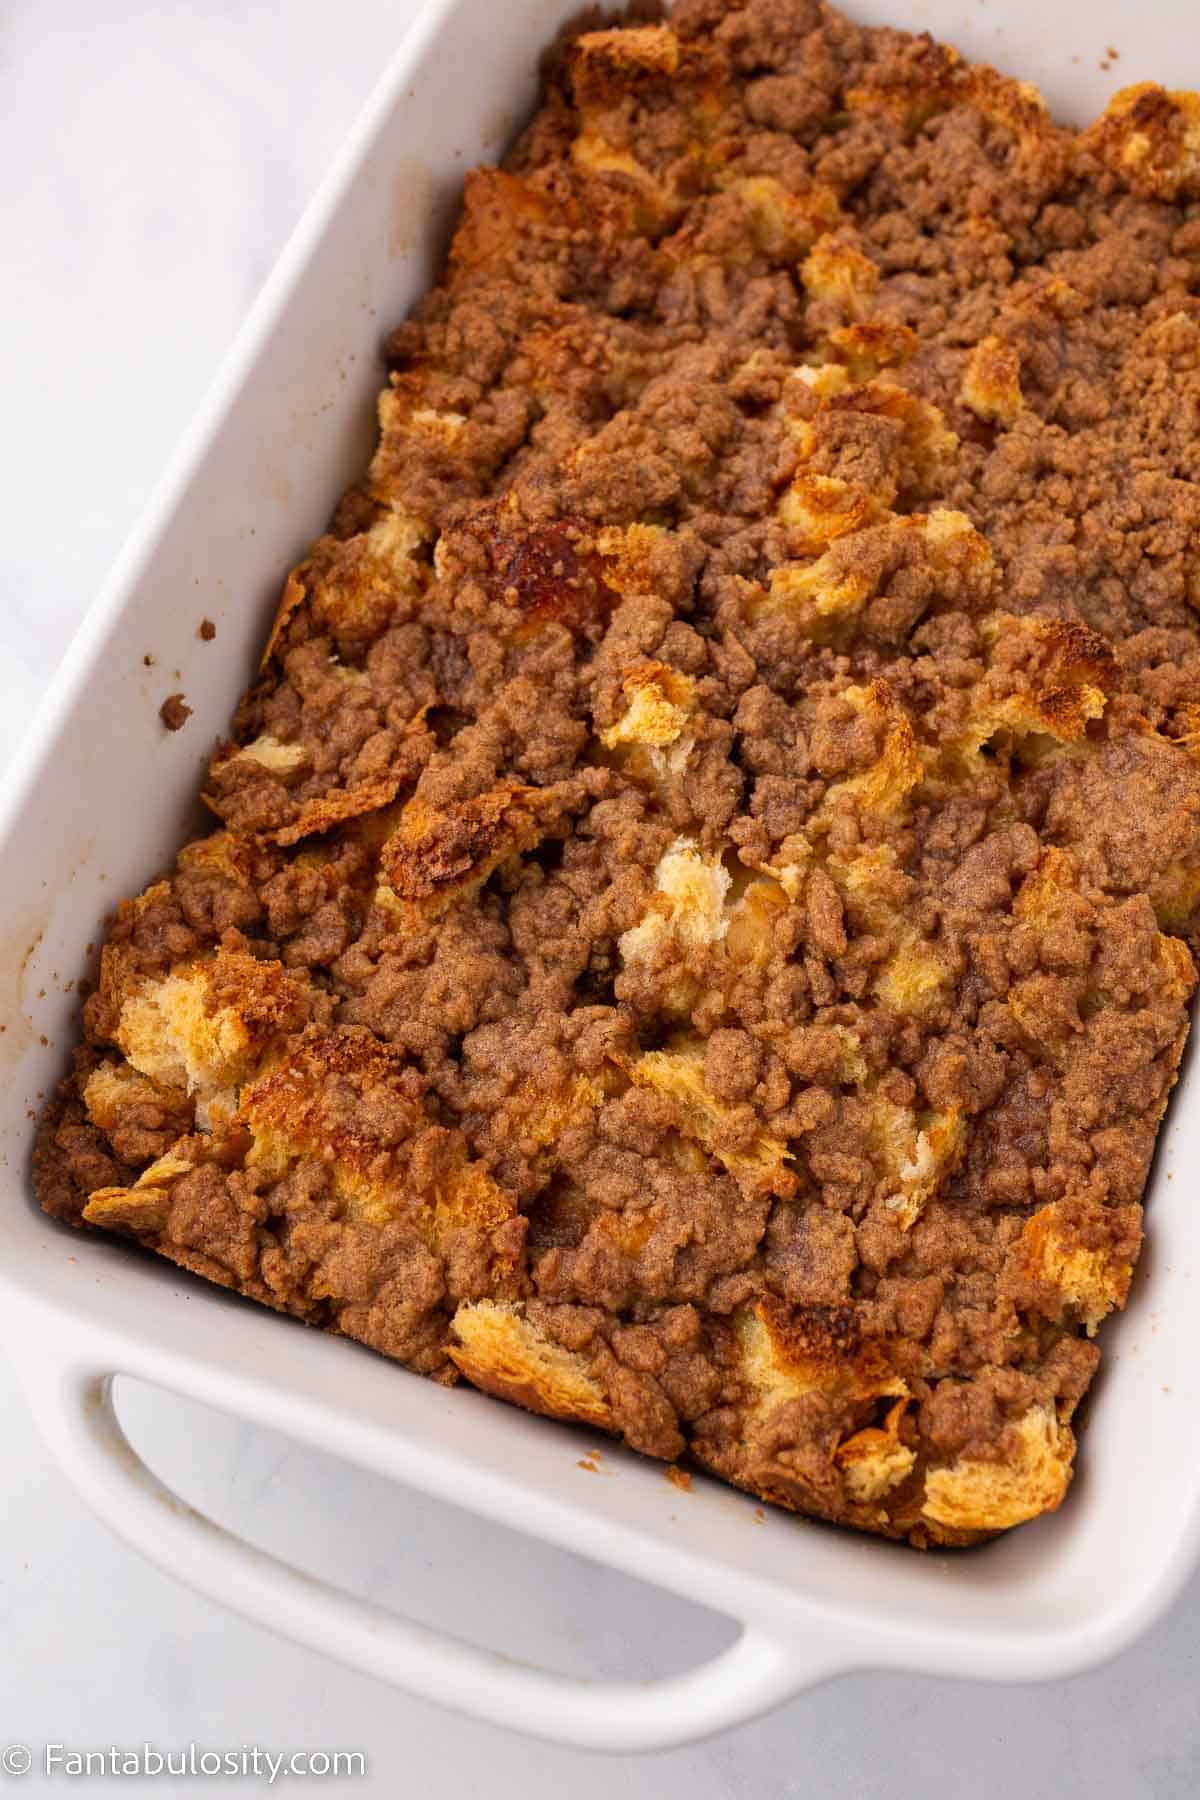 Baked french toast casserole in white baking dish.